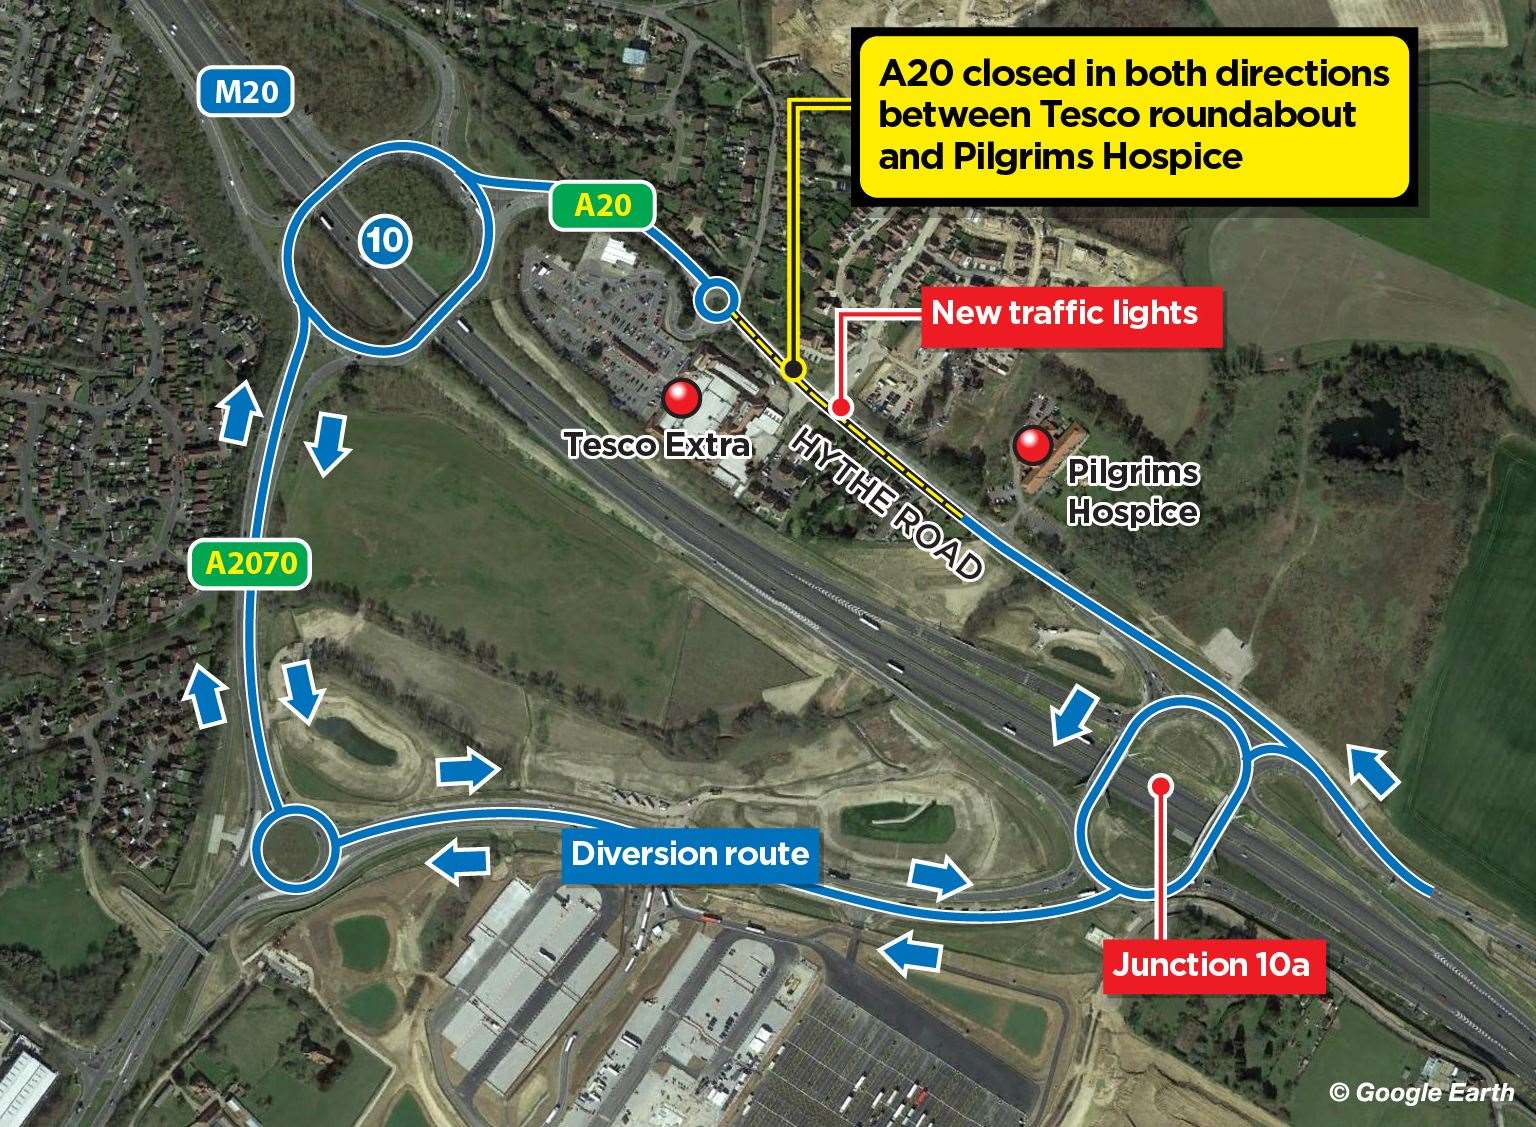 The diversion will take drivers on the A2070 past the Sevington lorry park